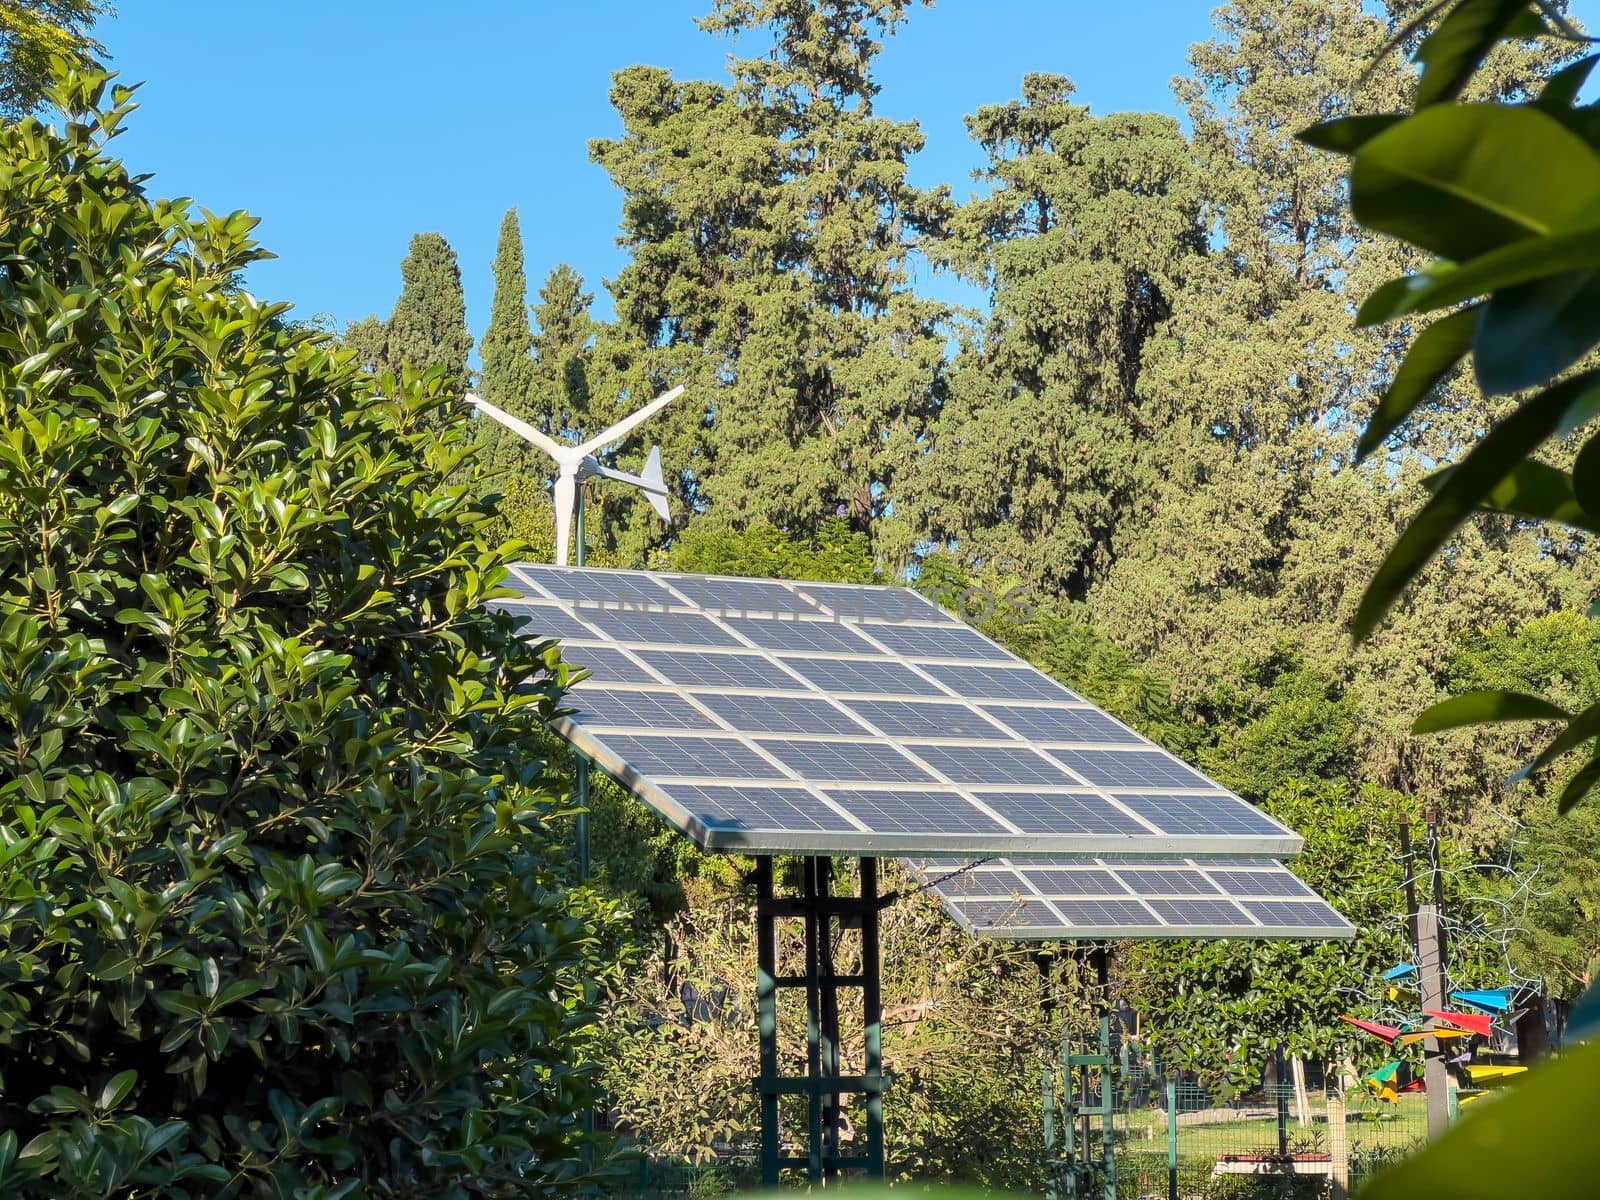 Wind turbine and solar panel installed in the green park area by Sonat